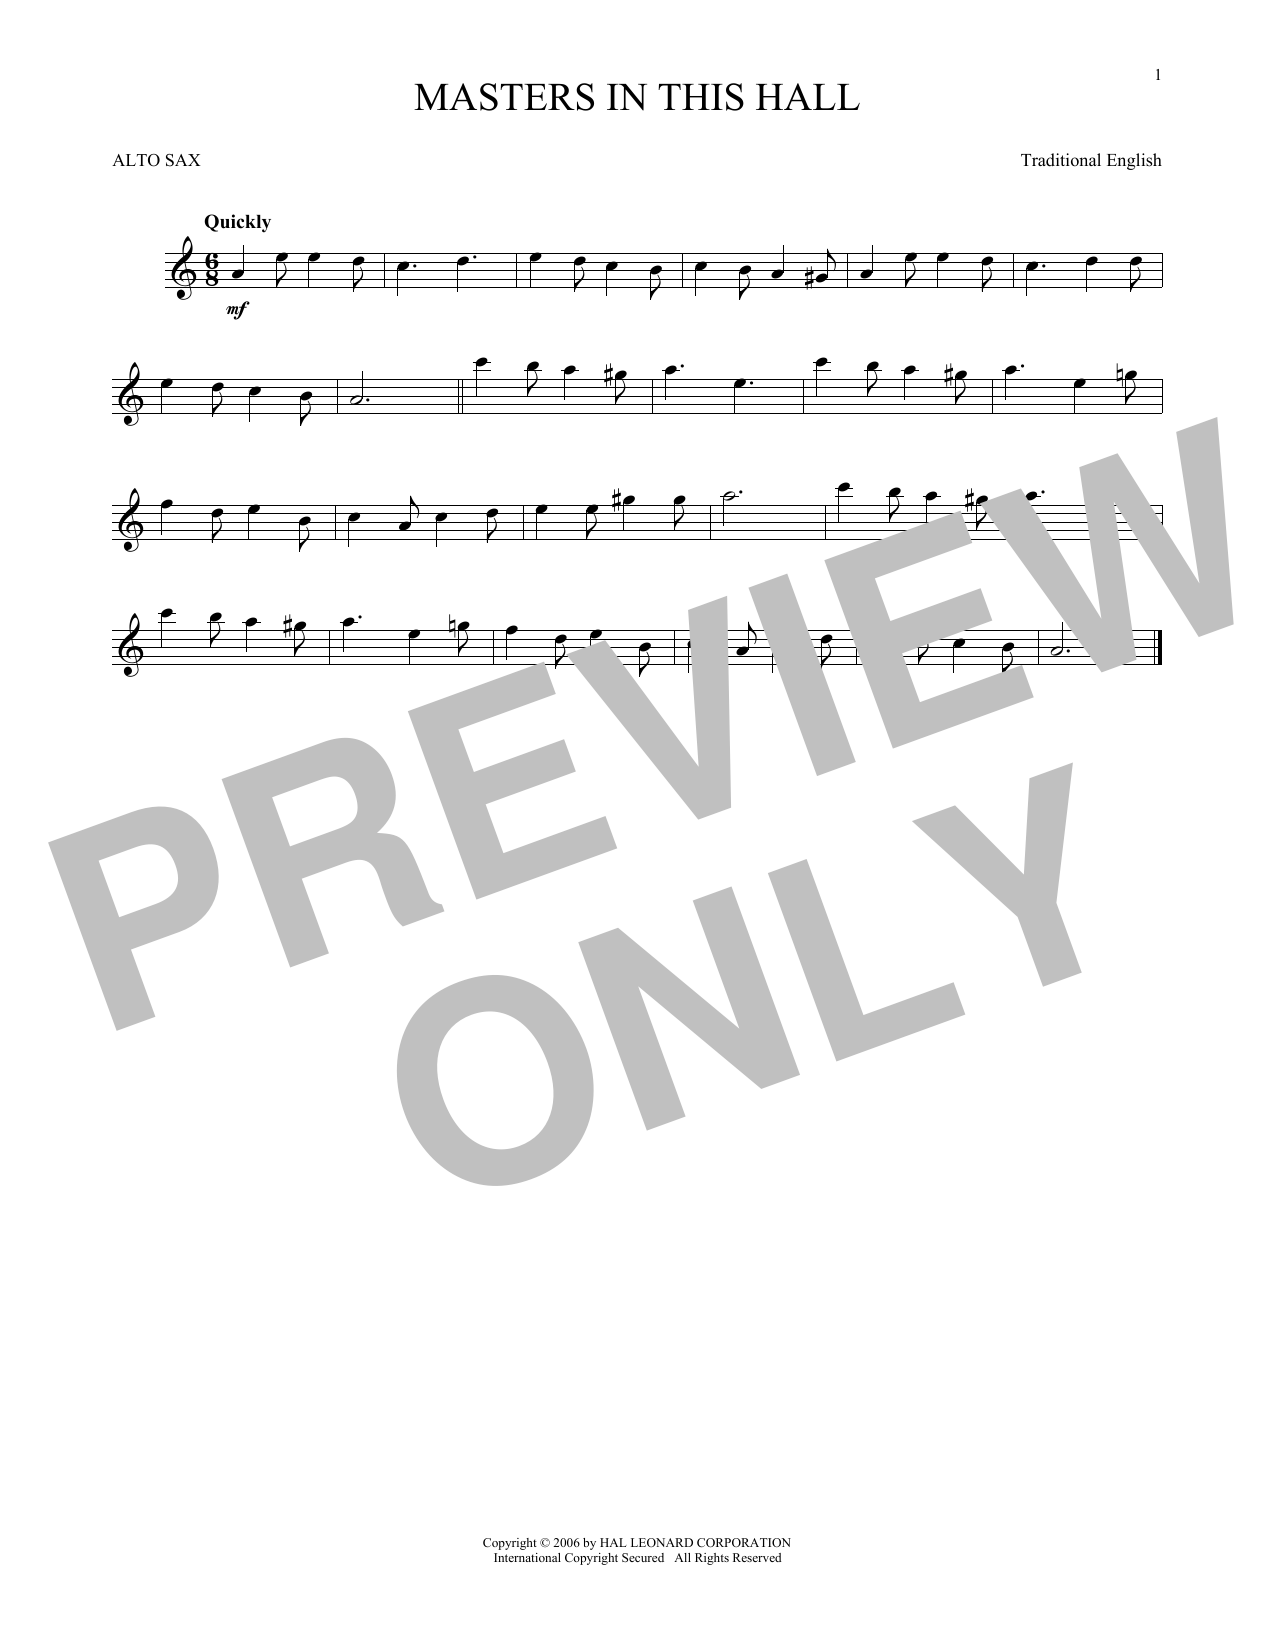 Download Traditional English Masters In This Hall Sheet Music